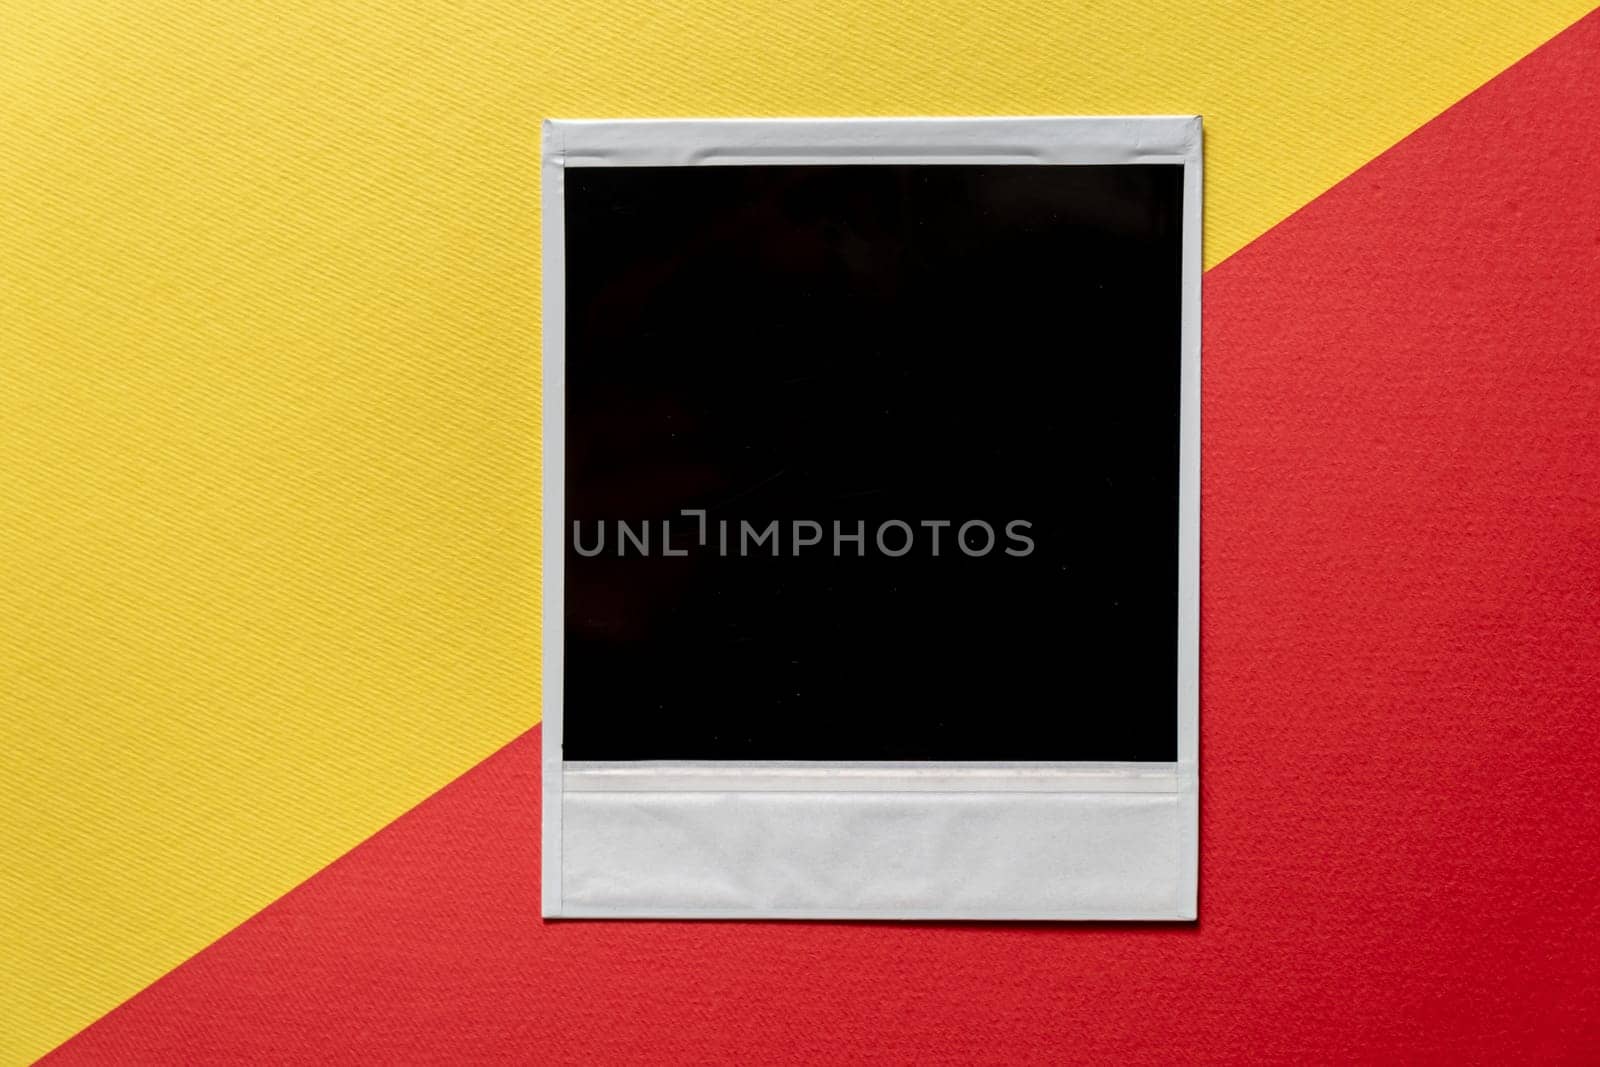 Download Blank photo frame template on red and yellow background. Blank square photo frame on wall copy space. download image